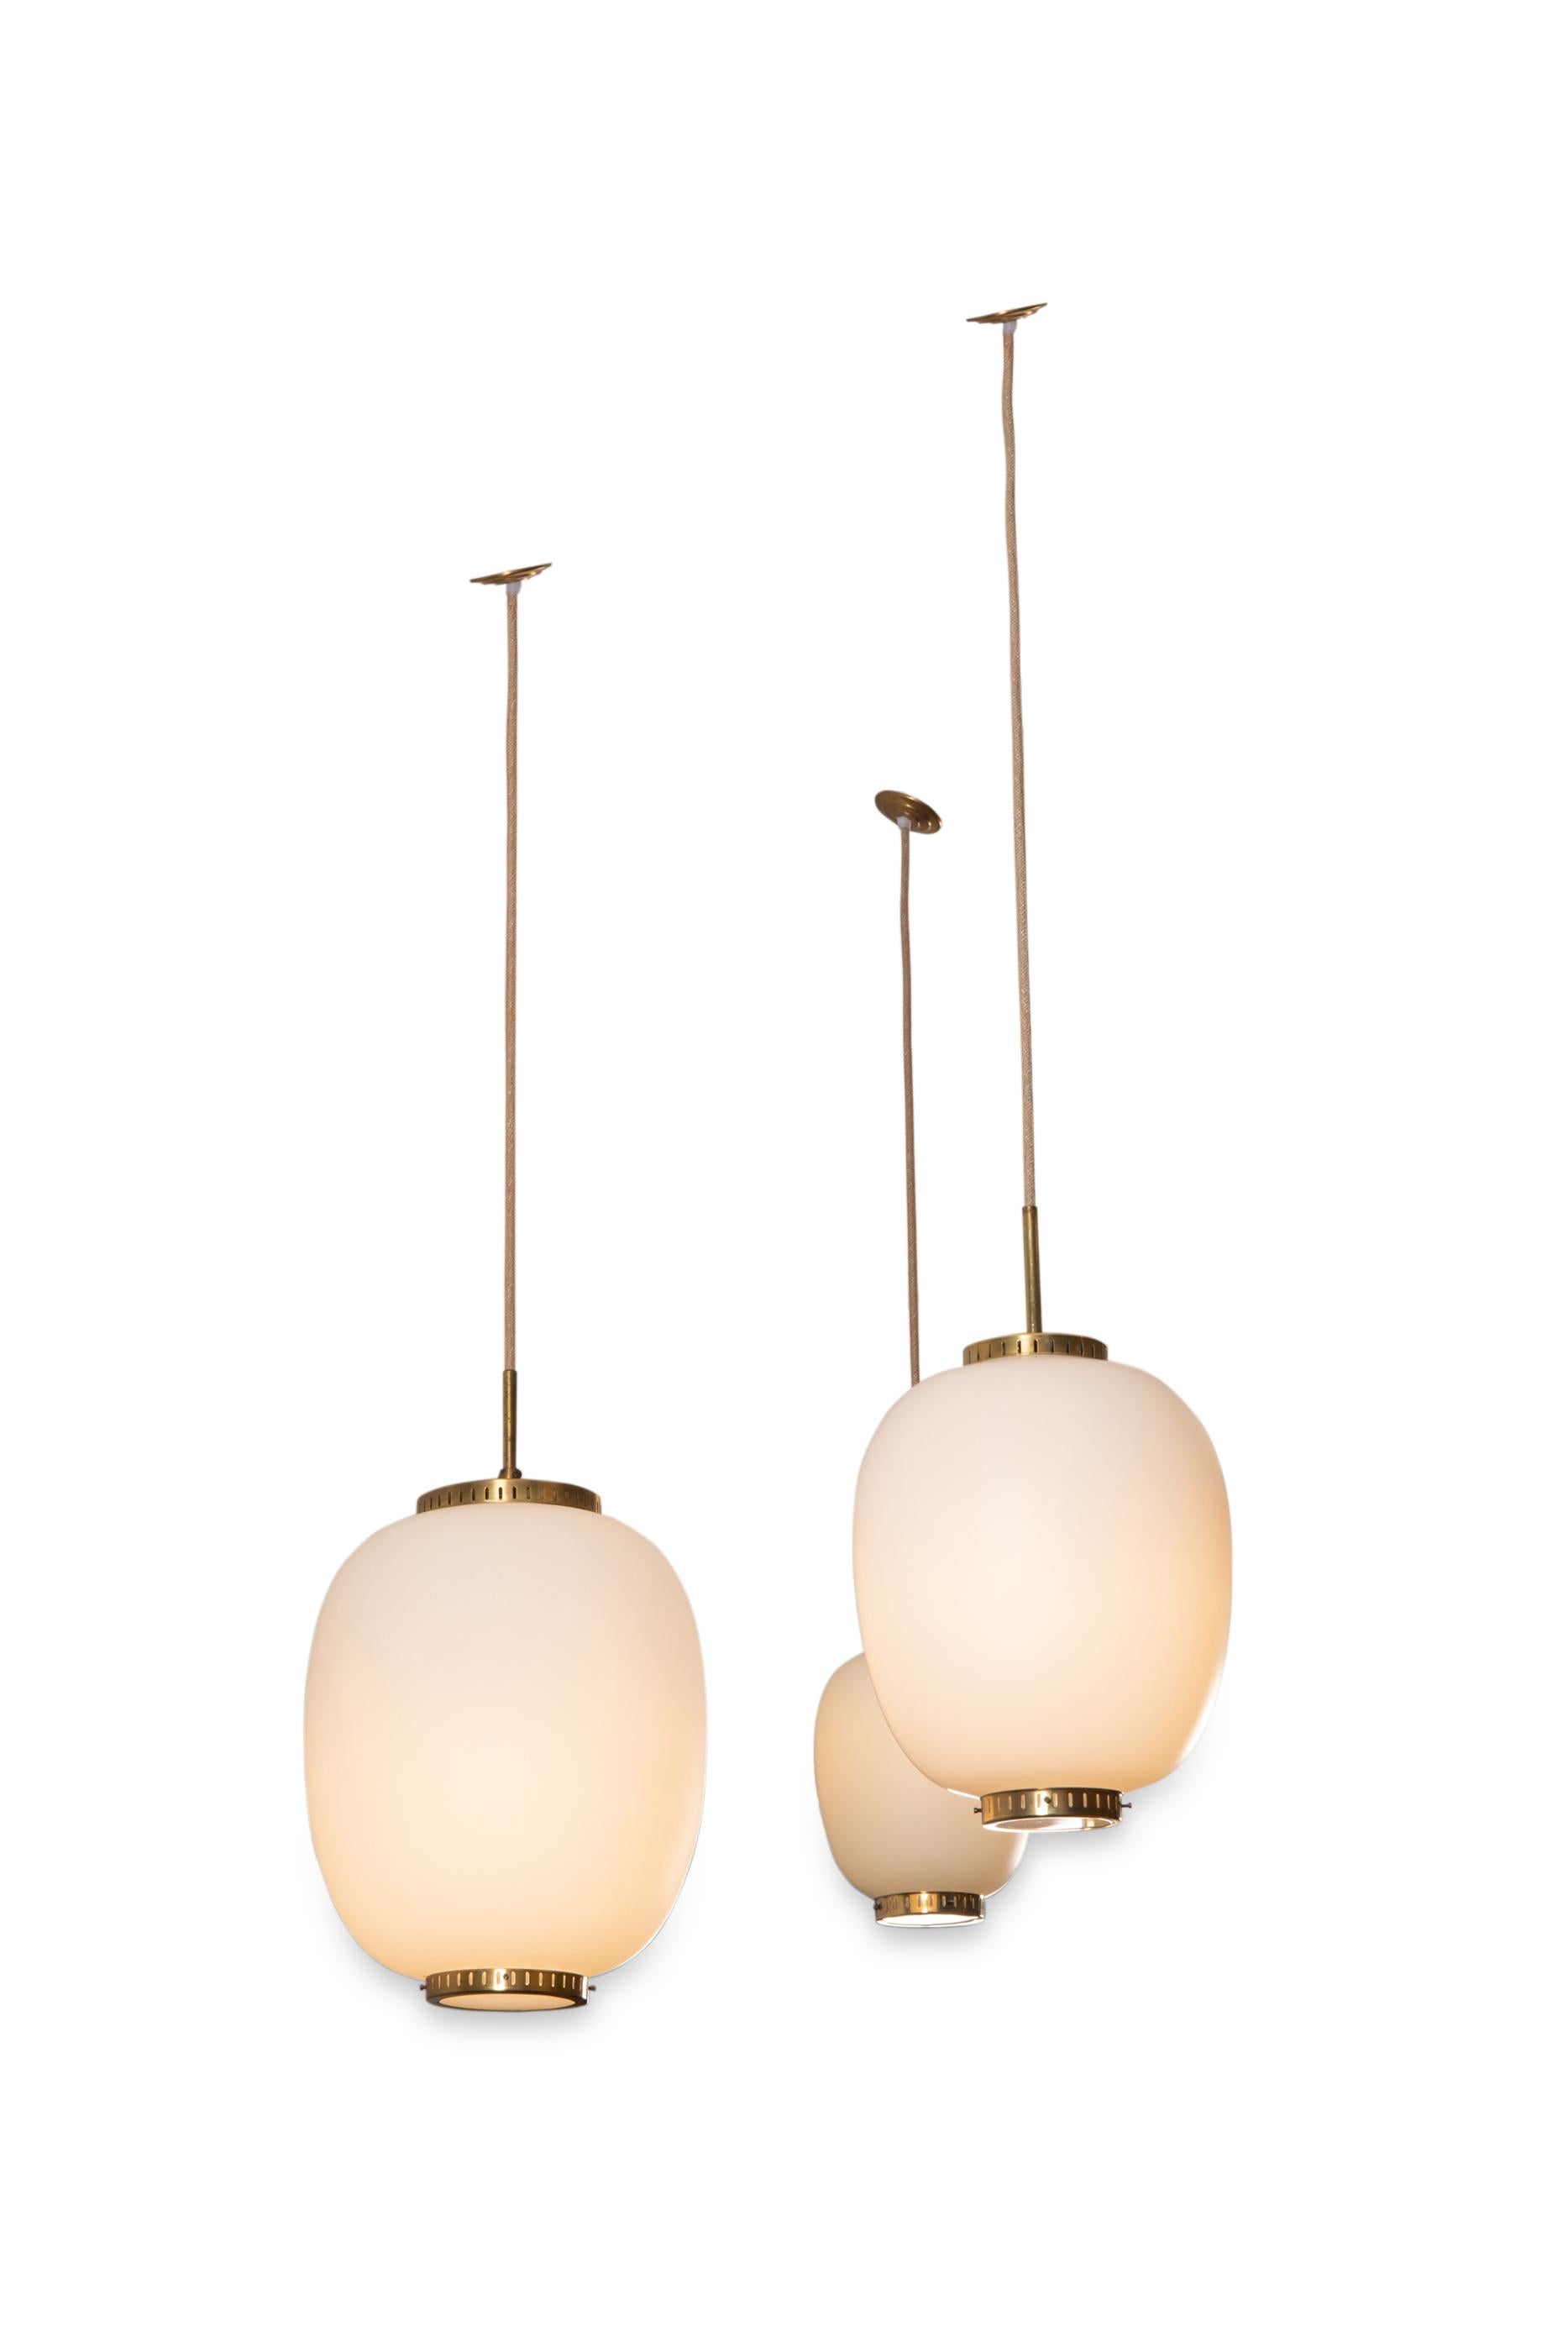 3 opaline glass and brass ceiling fixtures. 
3 items now available,
See dimensions below 
By Bent Karlby for Lyfa. 
Denmark, late 1950s 

 dimensions available: (Height of the opaline and brass disc) 
Medium (2 available ): H 11.8 in. (30 cm); D